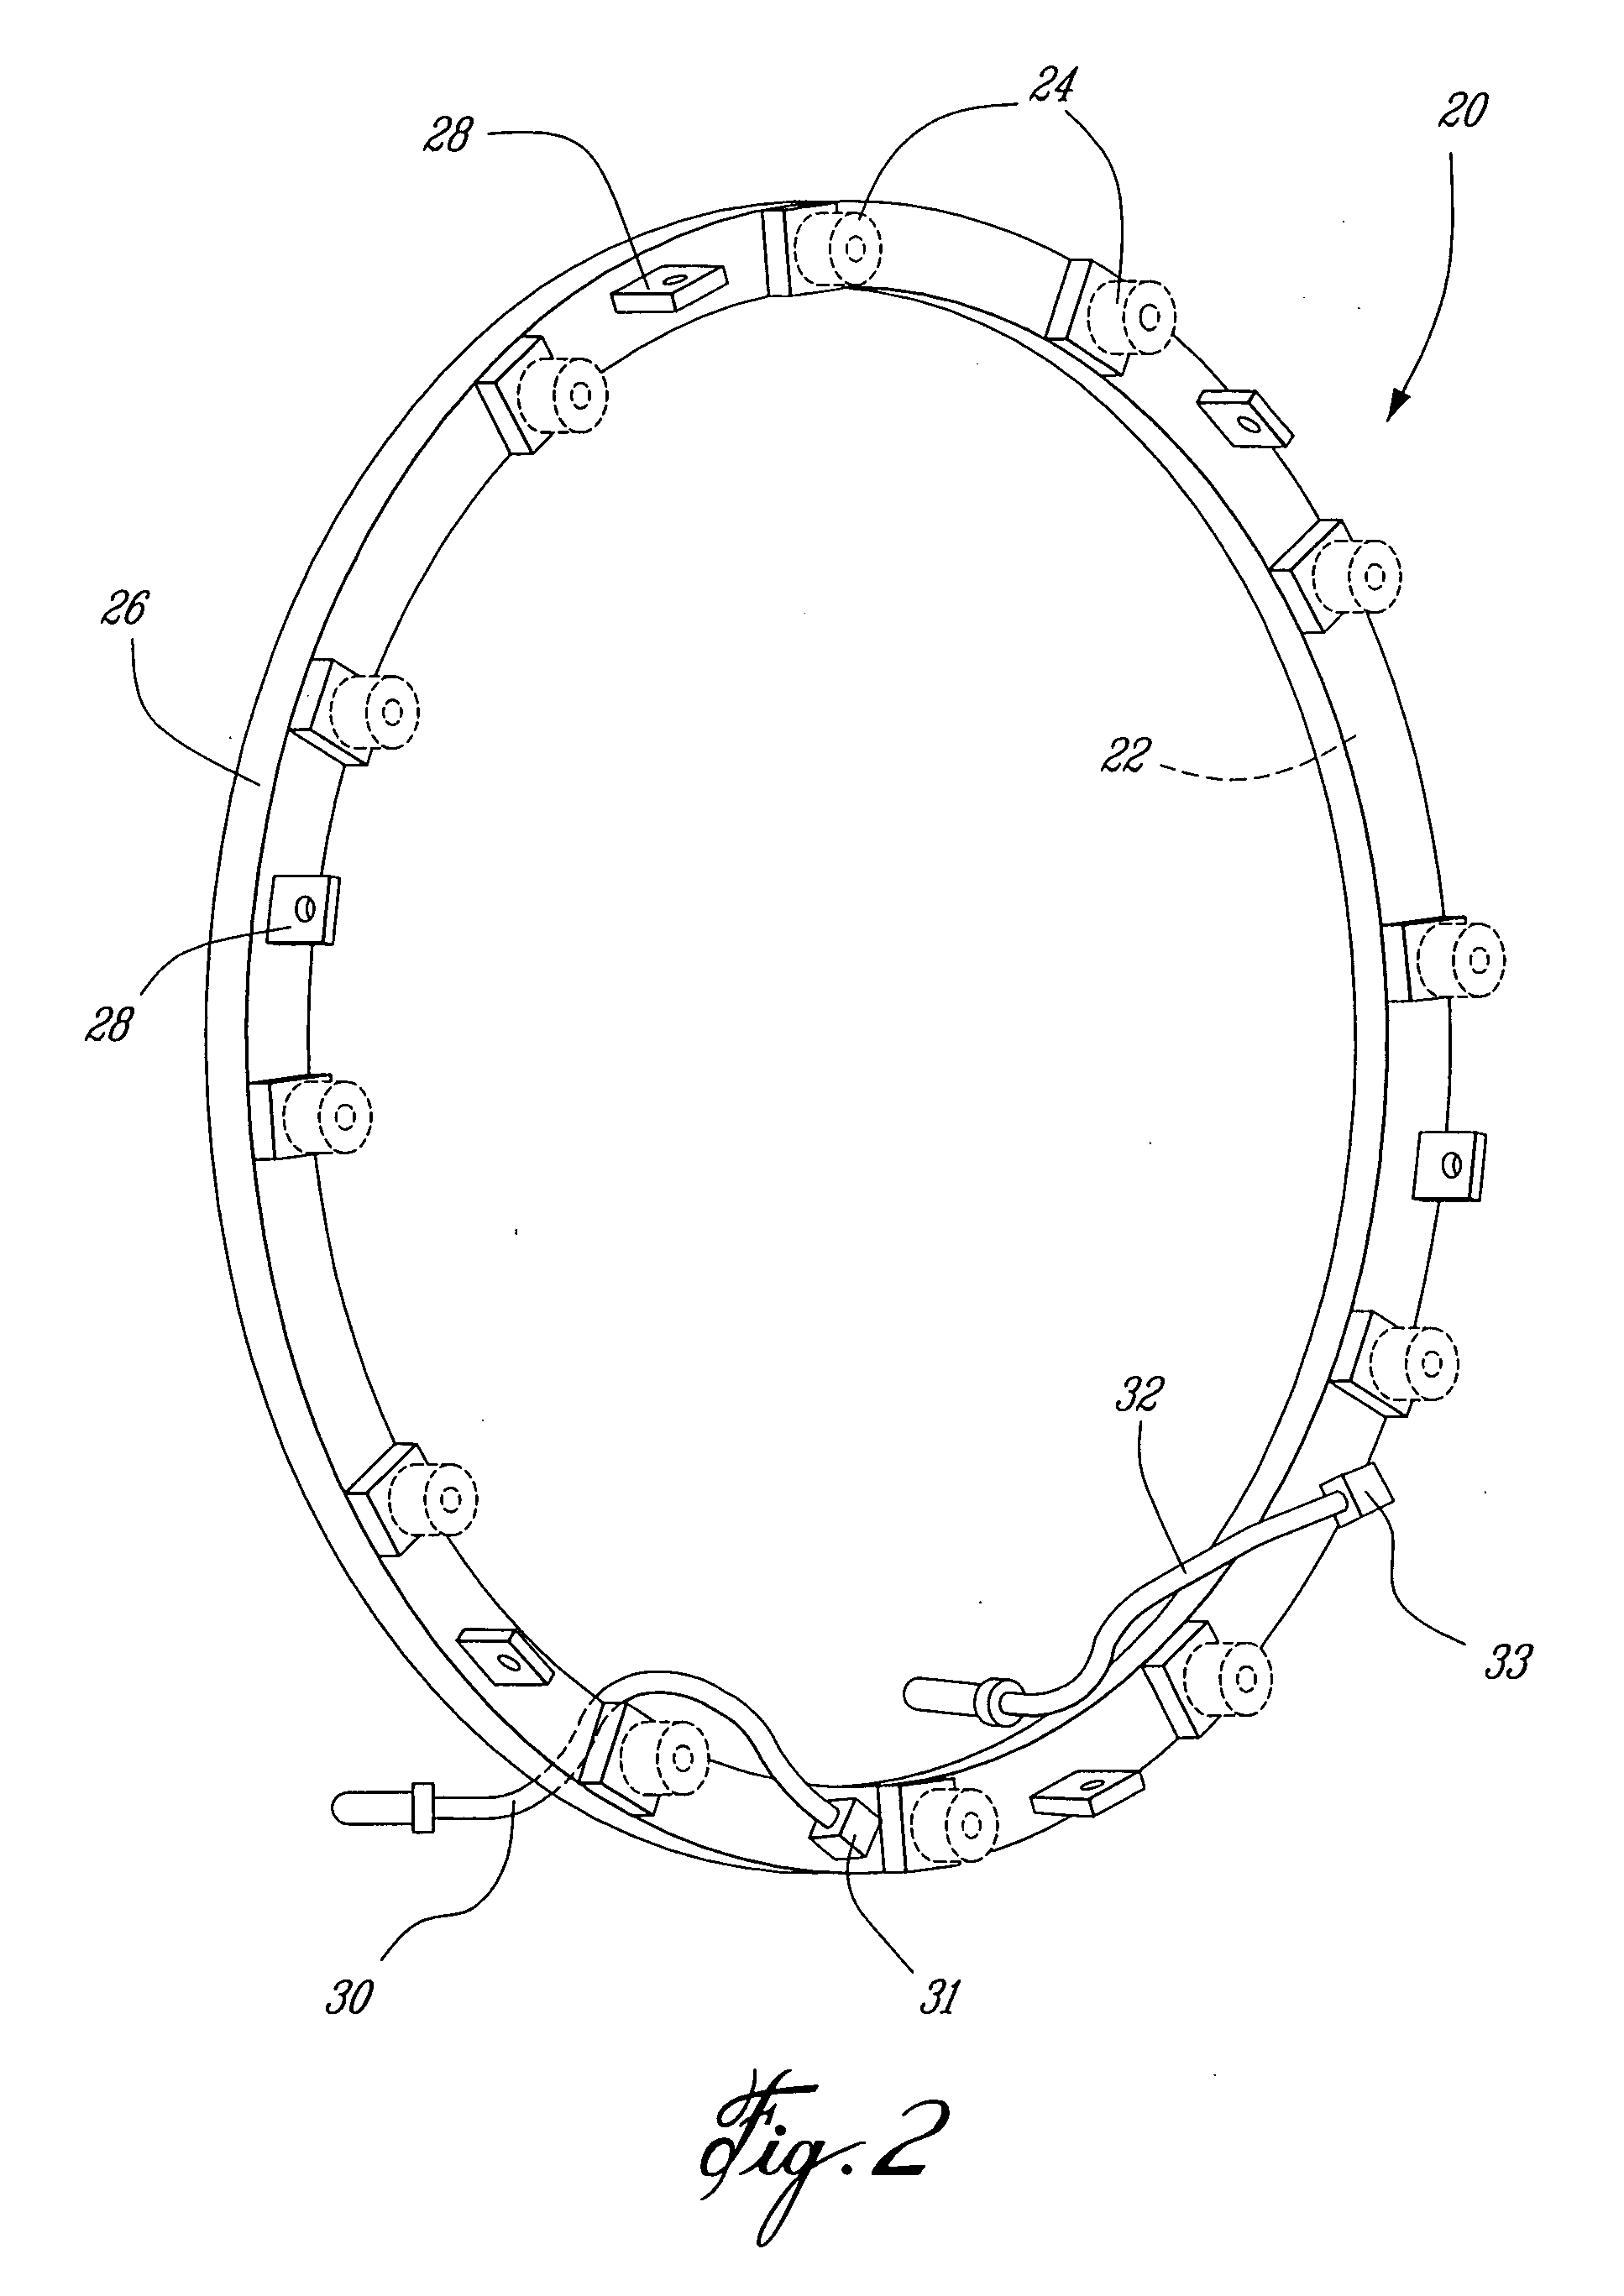 Apparatus for fuel transport and the like